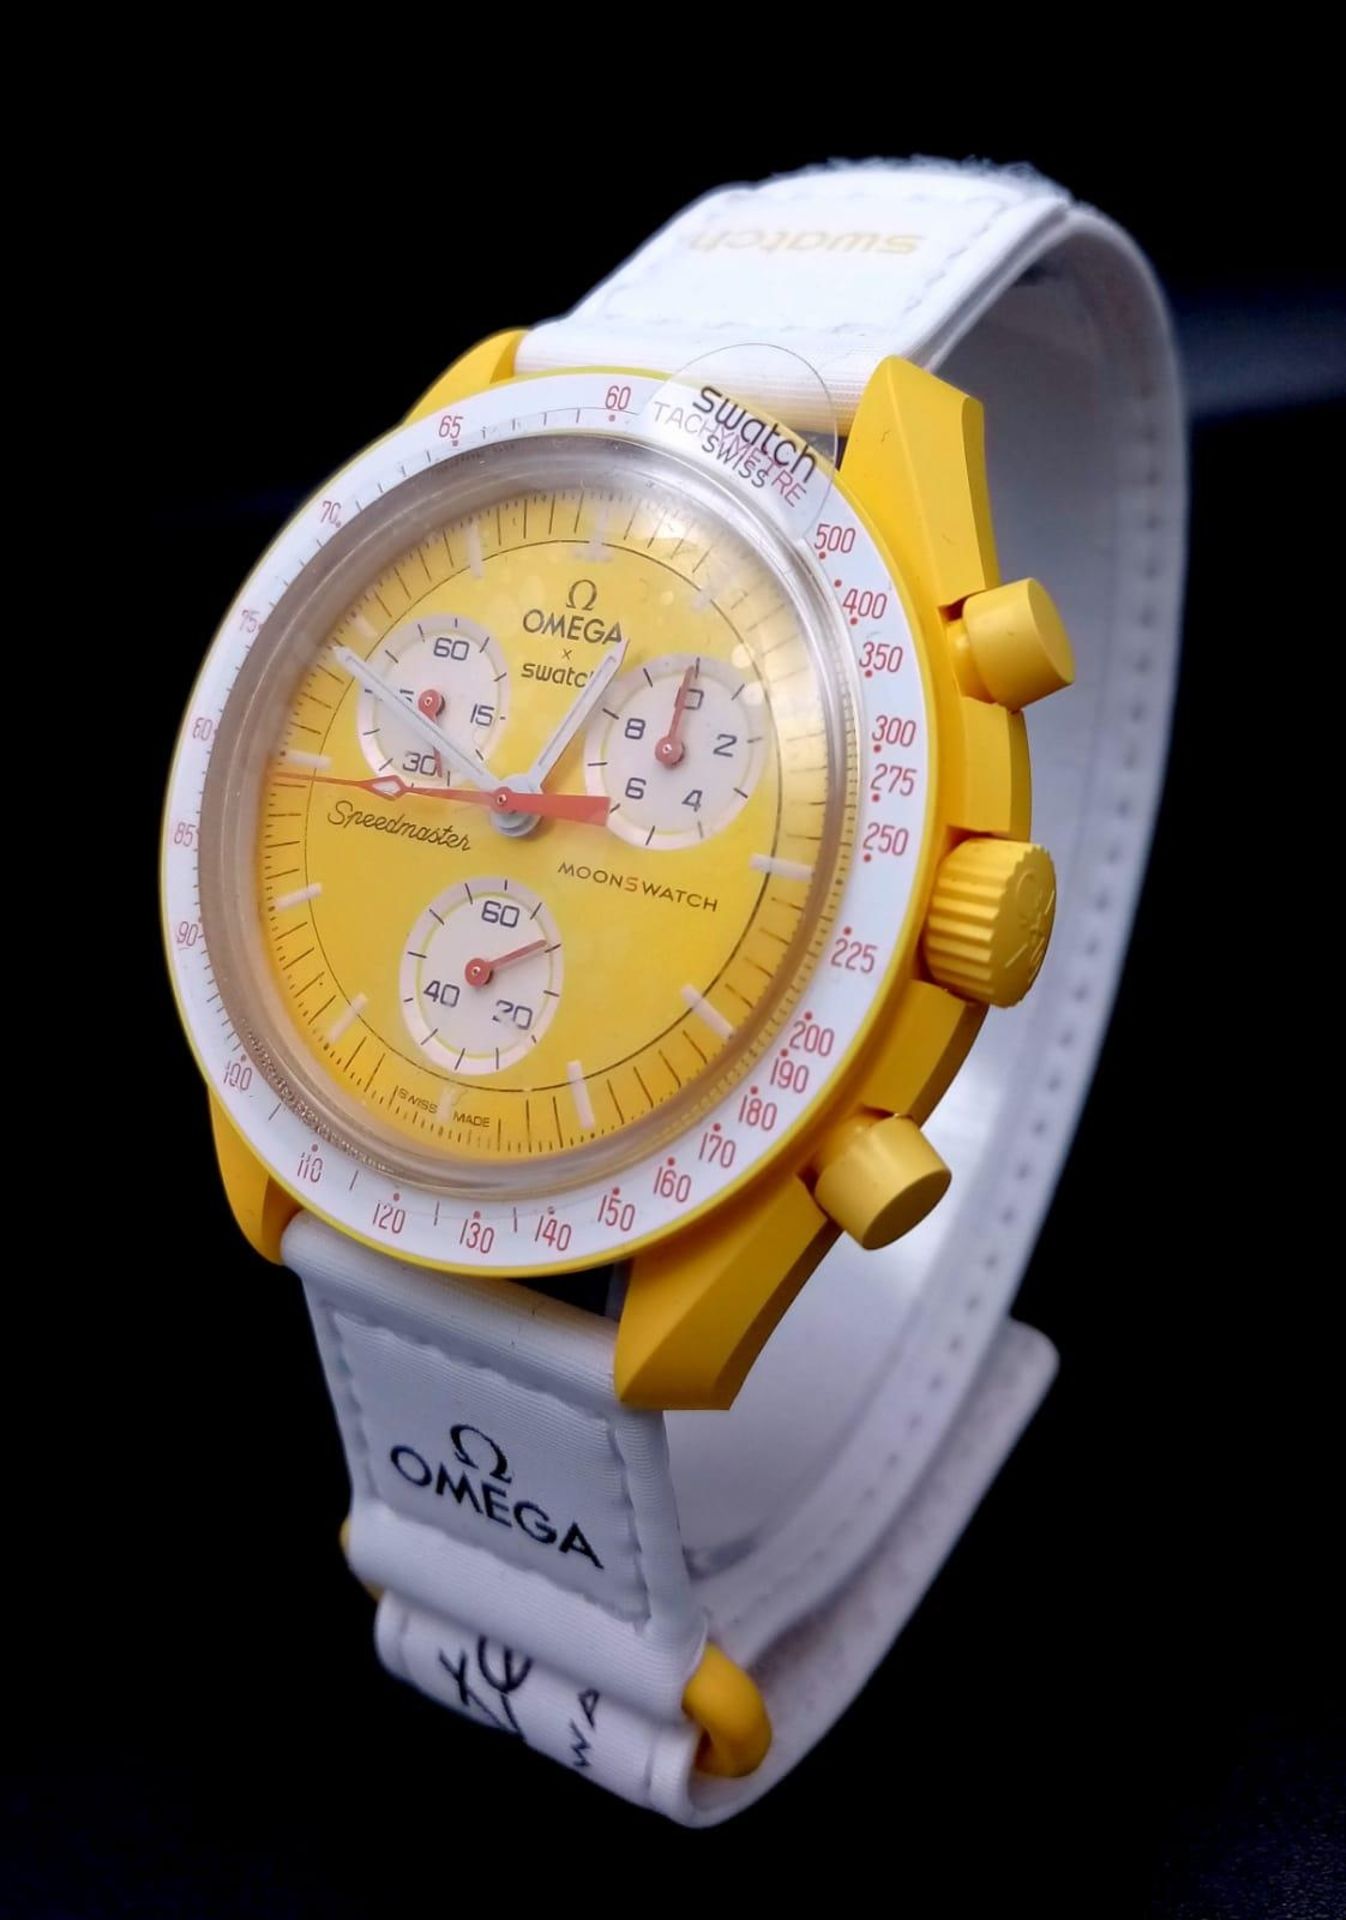 An Omega X Swatch Bioceramic Chronograph Mission To The Sun Watch. Yellow ceramic case - 42mm.